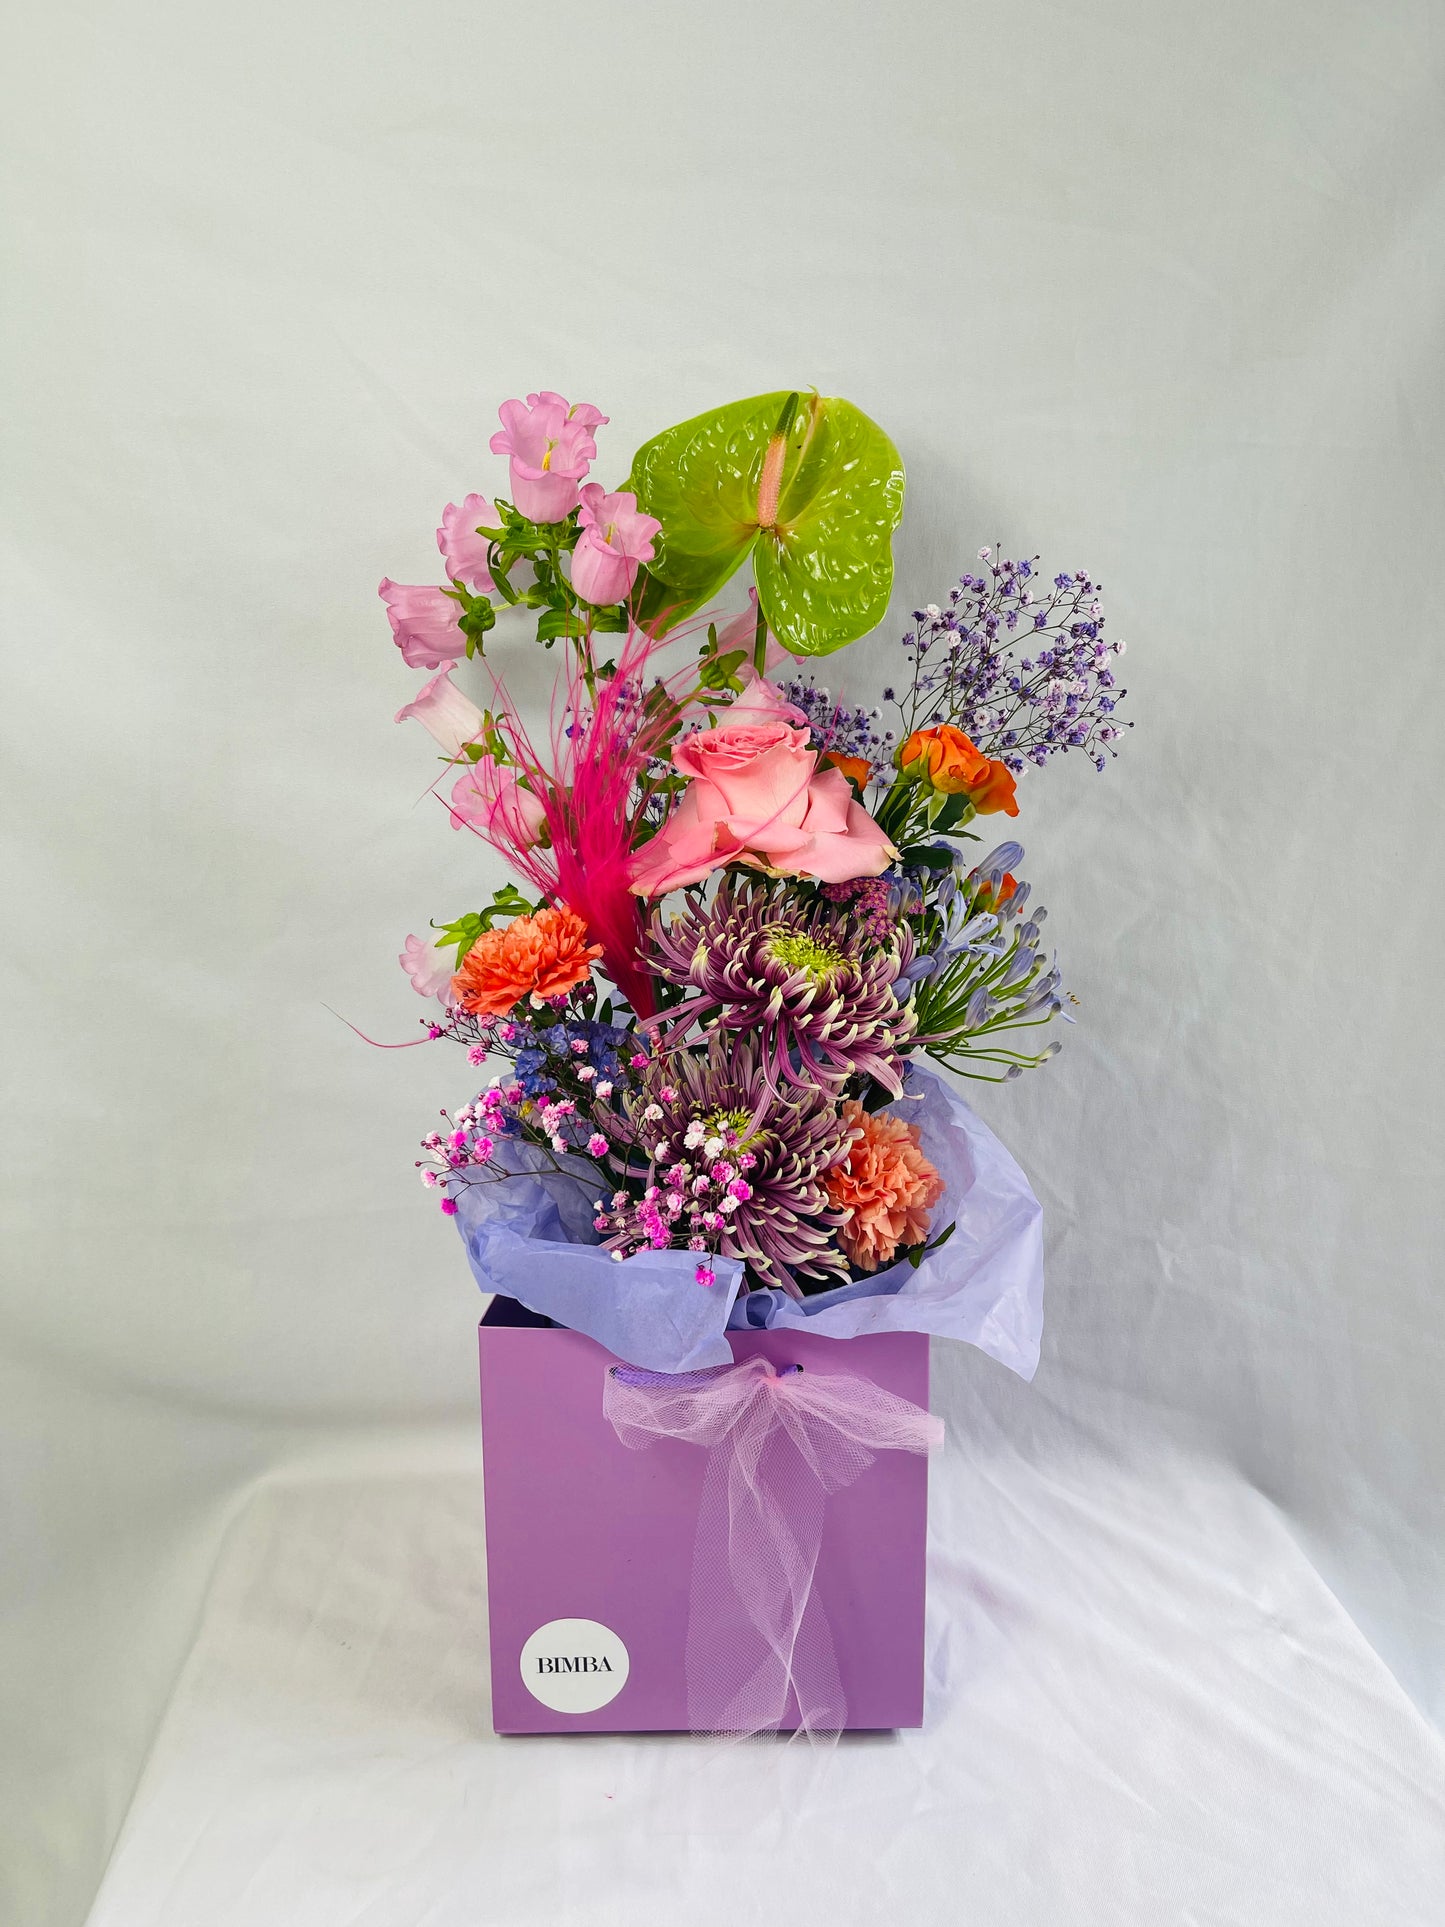 Coolleen bouquet. Stunning flower arrangement featuring caribbean anthurium, lovely achillea, statice in different tones, sweet scented rose, strawberry campanula, chrysanthemum, asclepia, rainbow gypsophila, orange carnations, agapanthus, and hot pink stypha grass. by bimba Floral Studio.